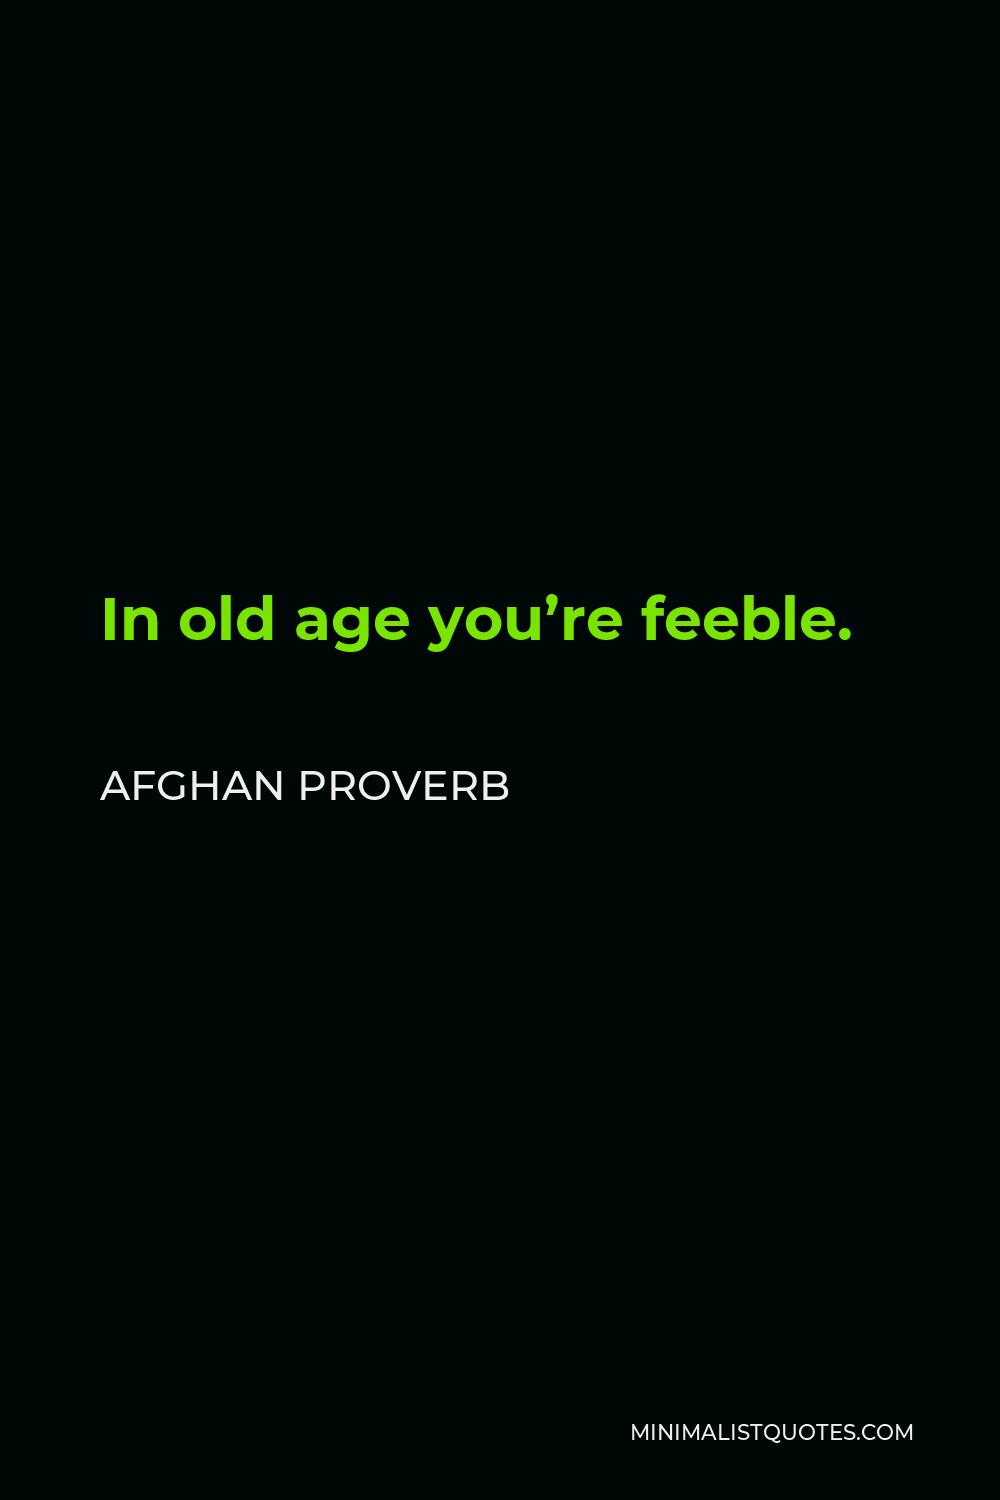 Afghan Proverb Quote - In old age you’re feeble.